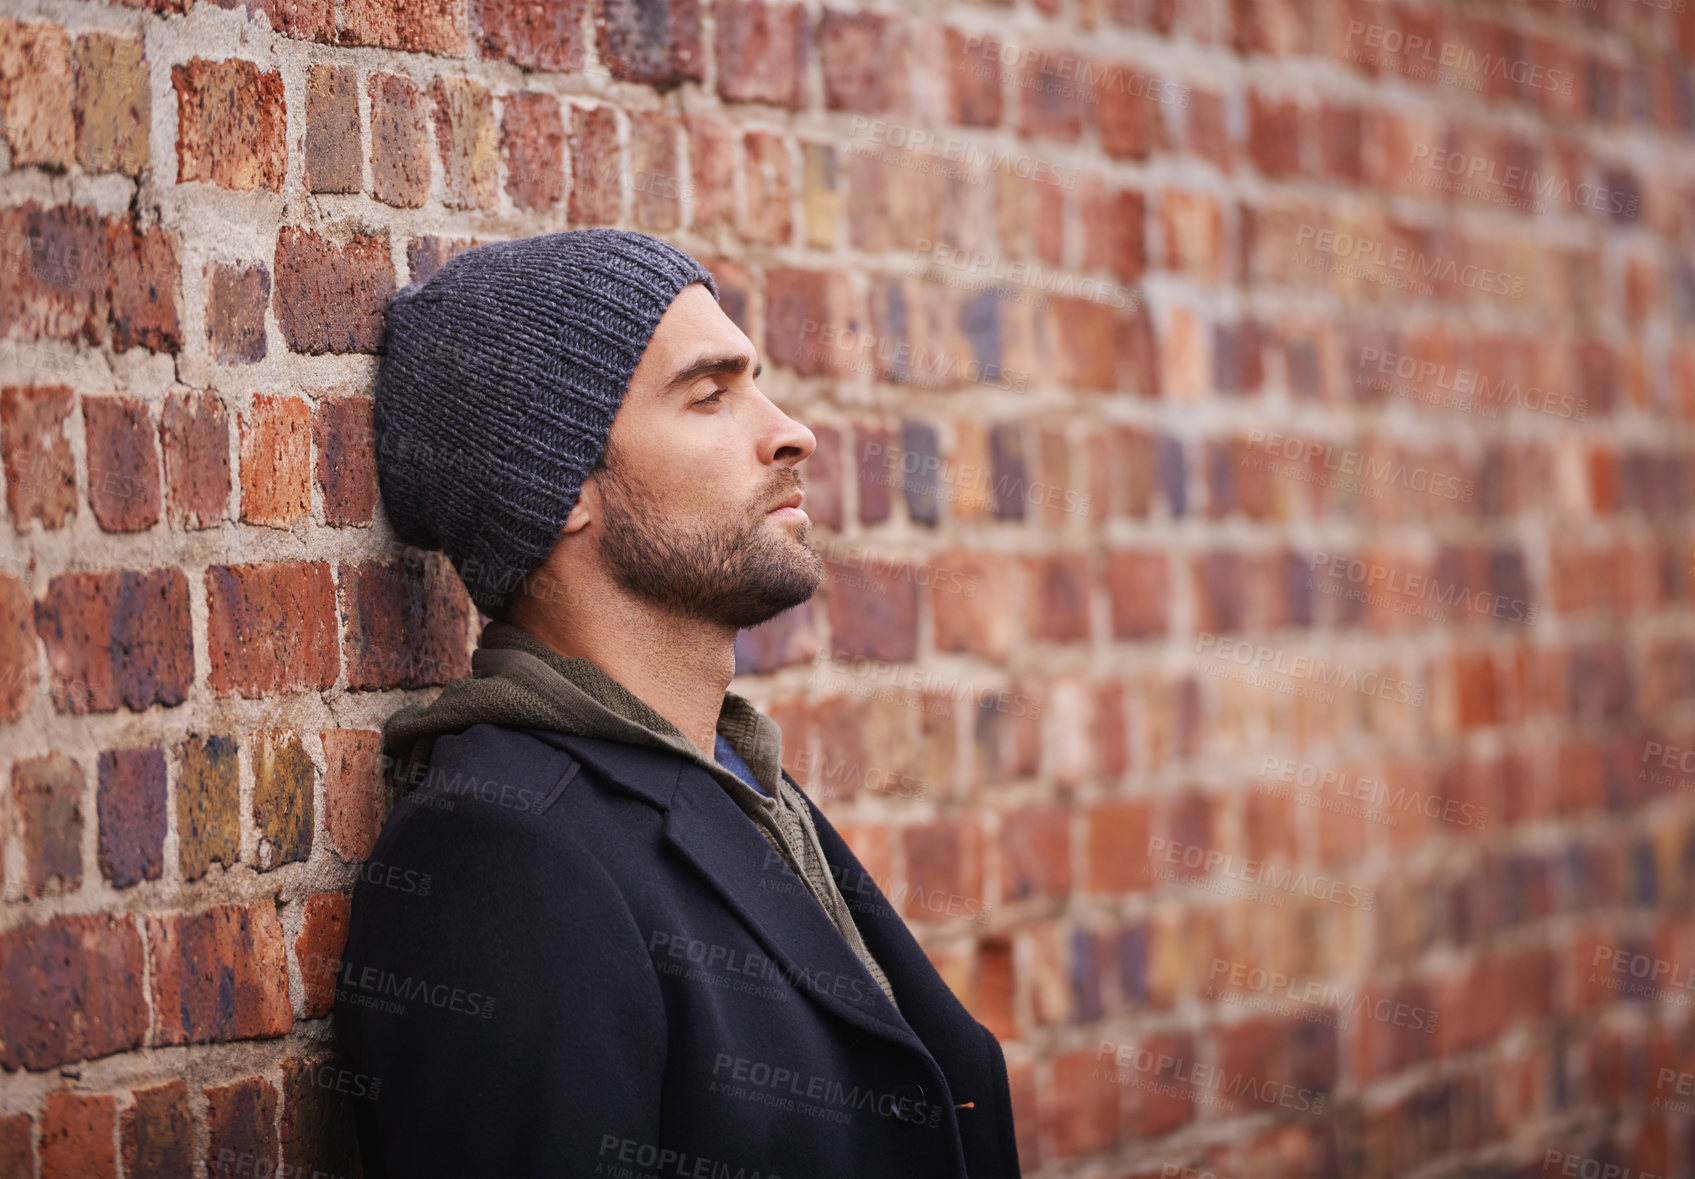 Buy stock photo Cropped shot of a fashionable man leaning against a brick wall in an urban setting